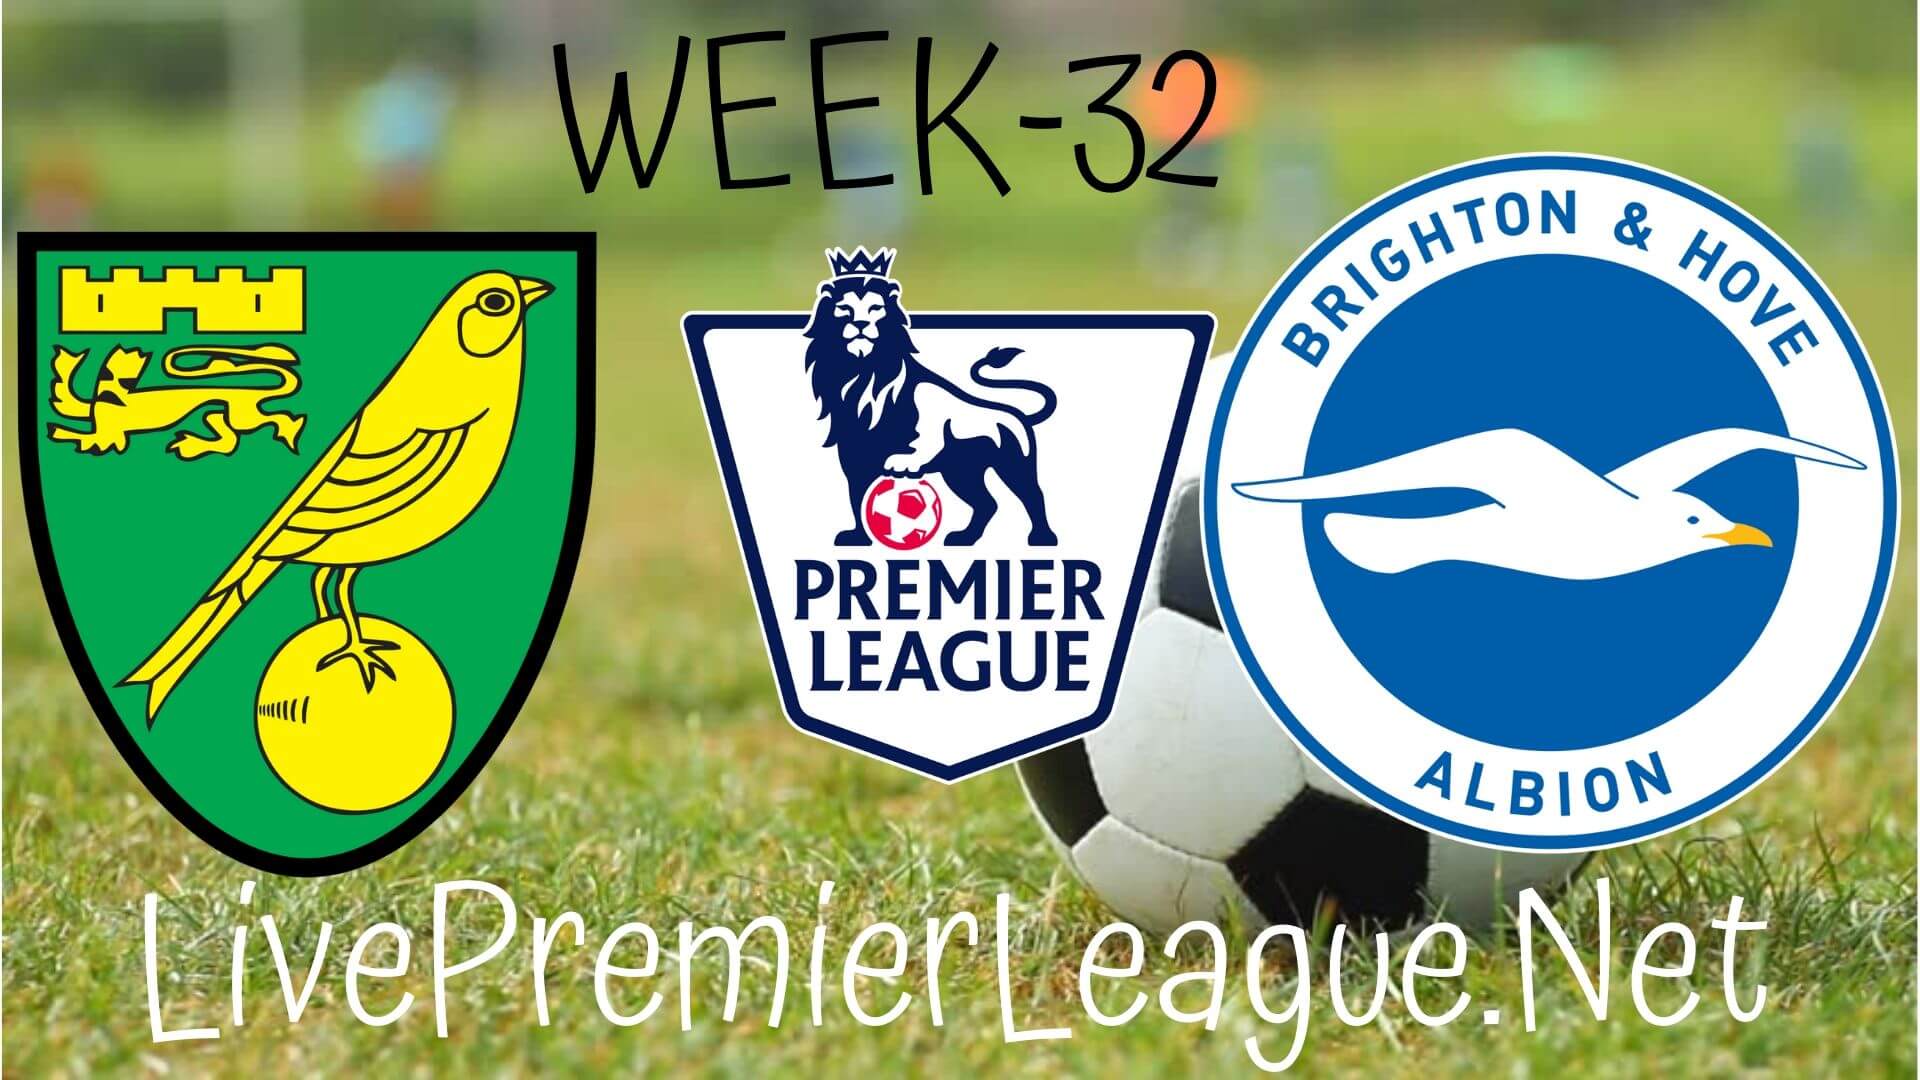 Norwich City Vs Brighton and Hove Albion Live Stream | EPL Week 33